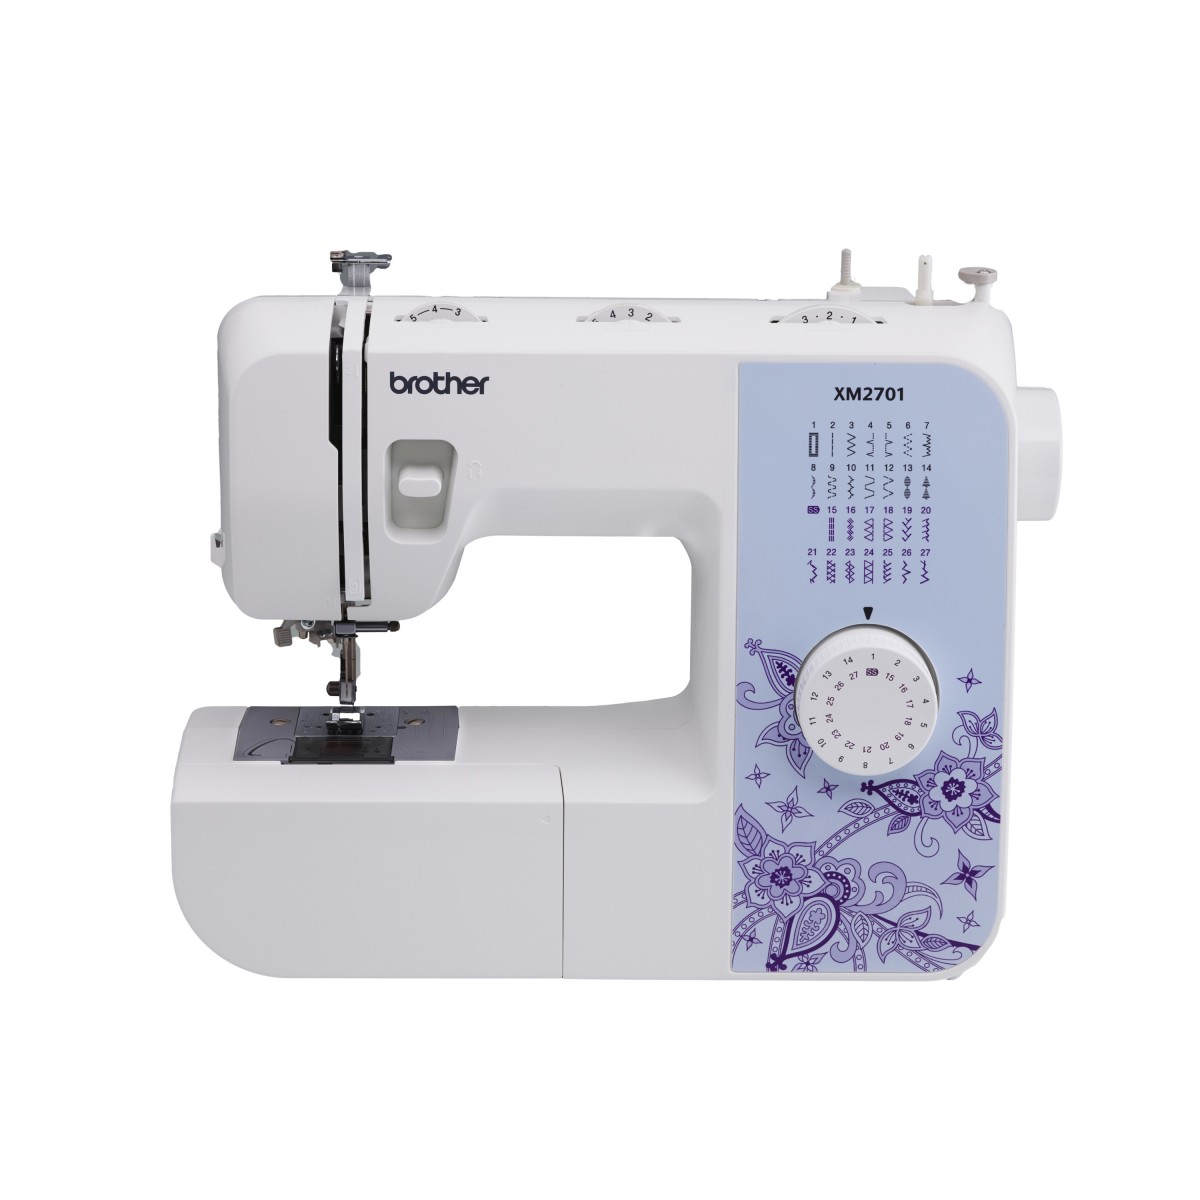 brother xm2701 sewing machine review